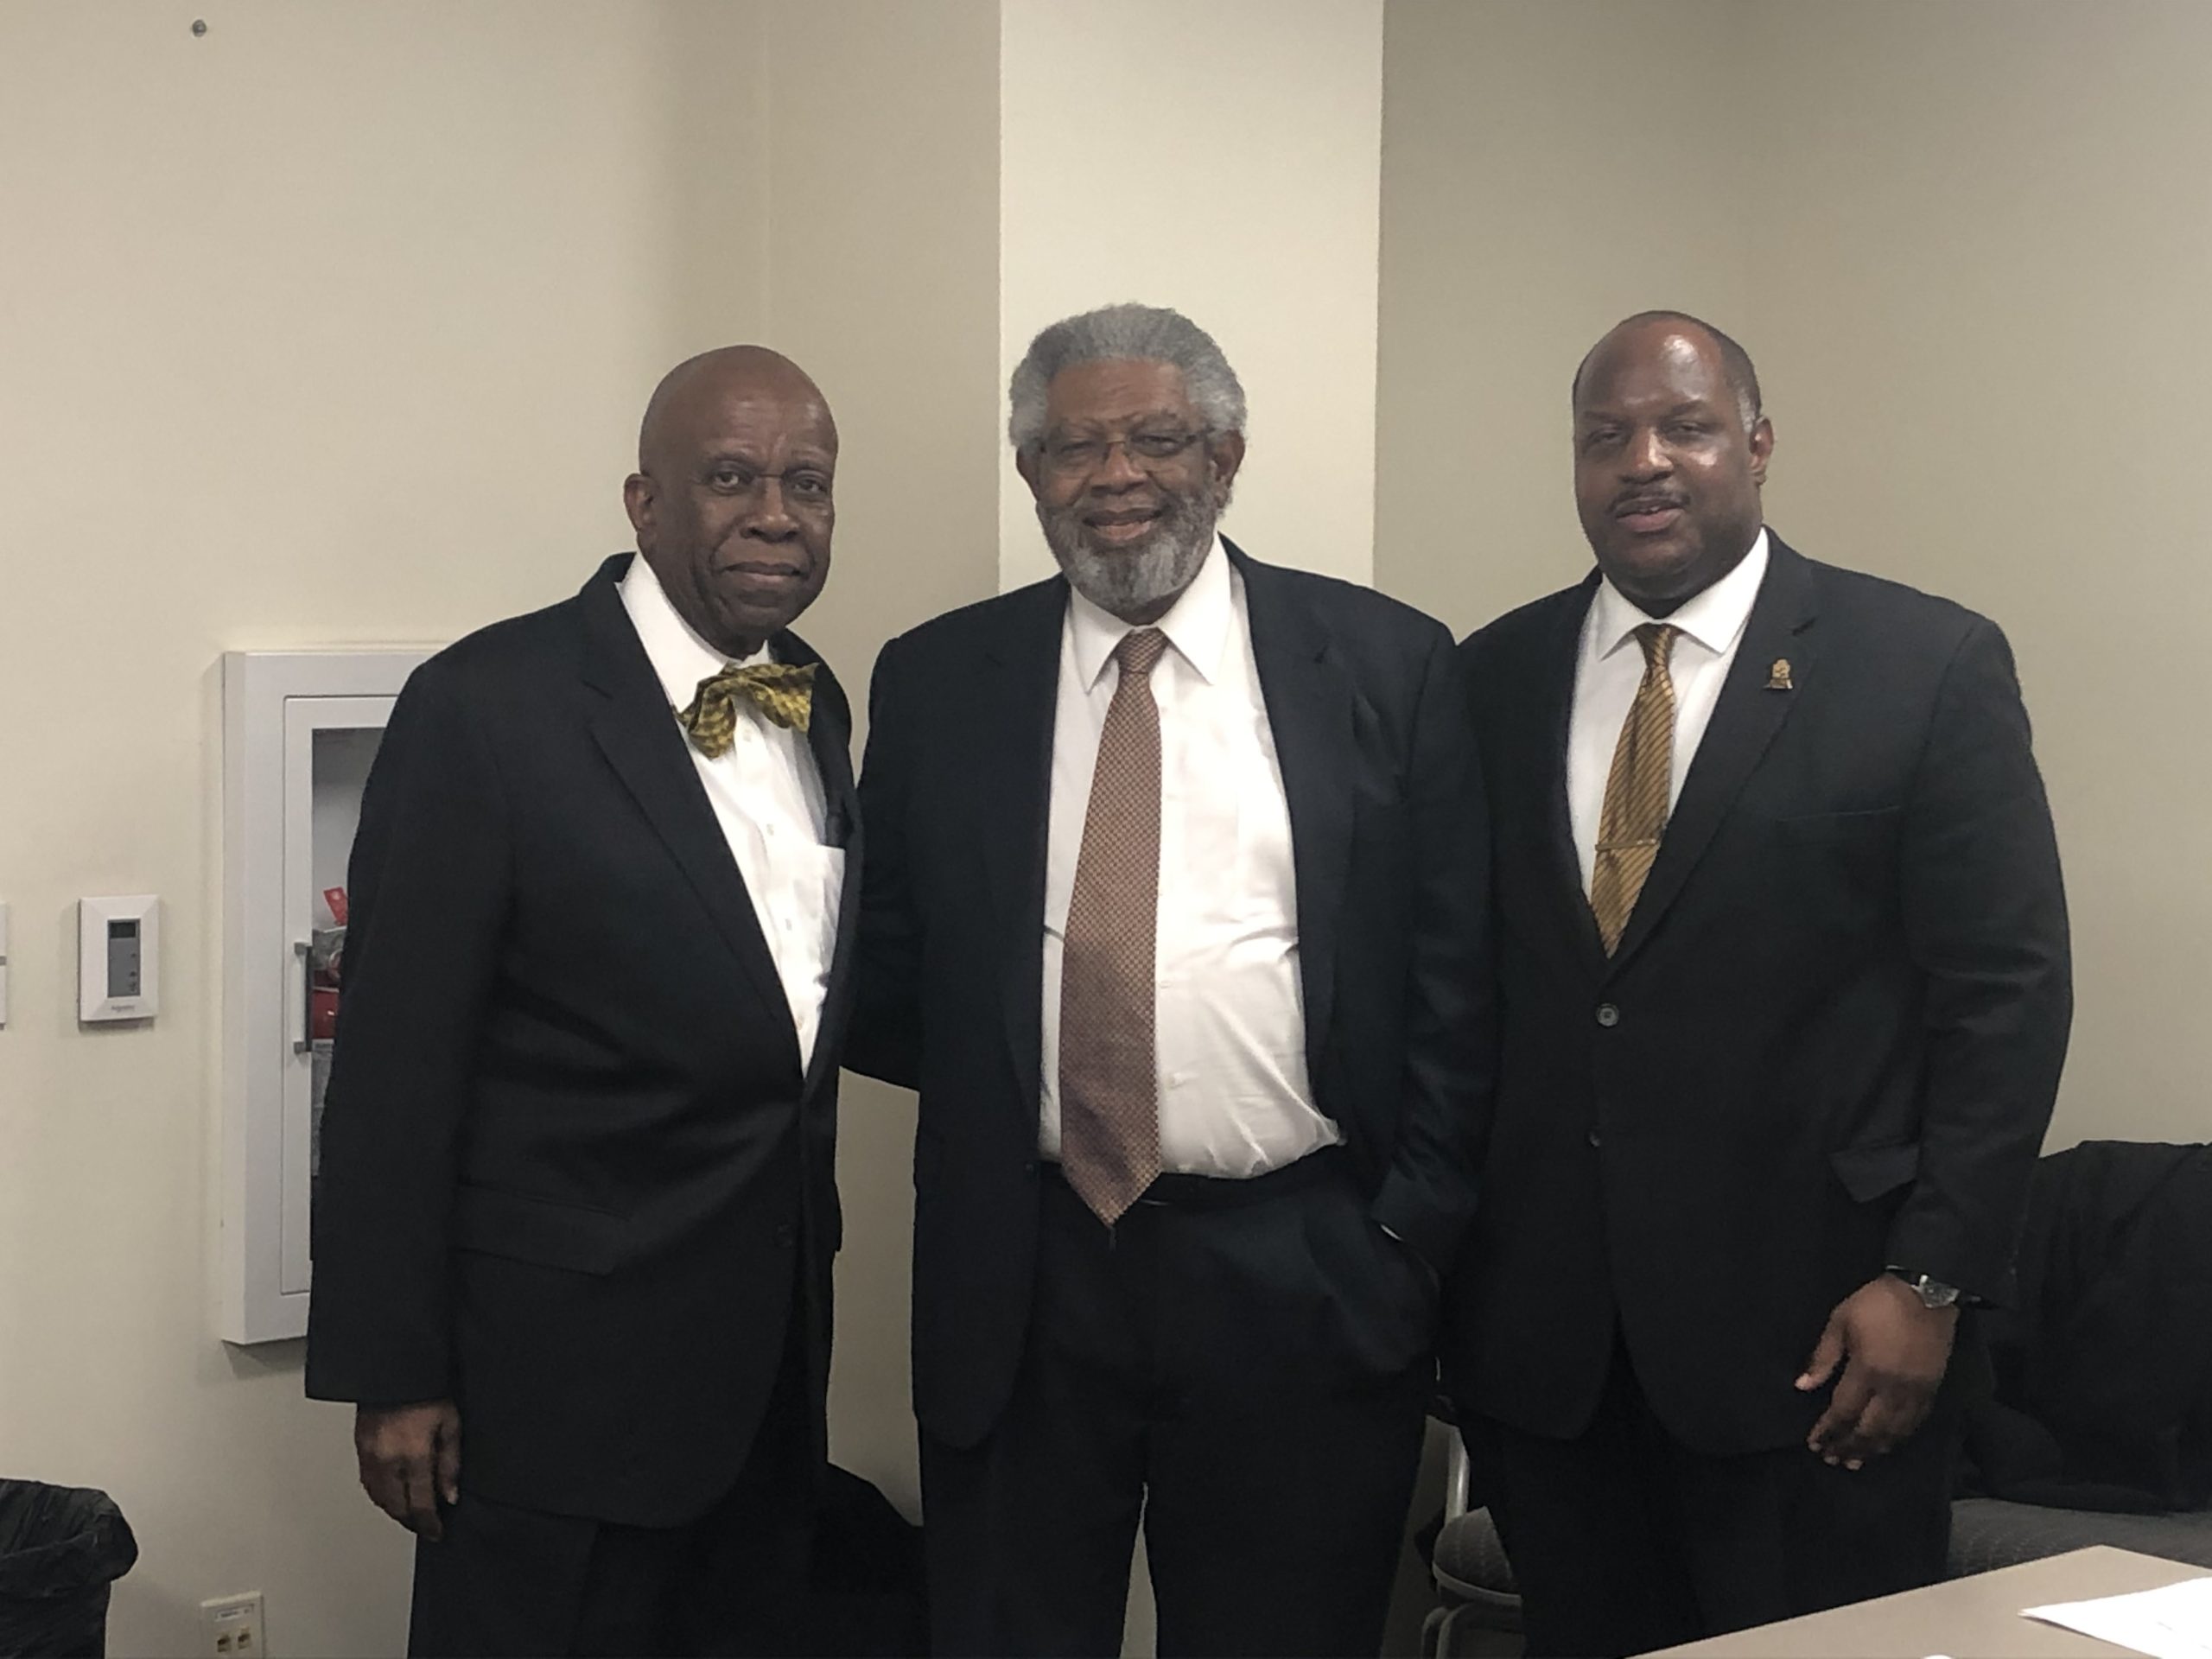 KL Brother Porter with APL Brothers Terry and Burris 1119